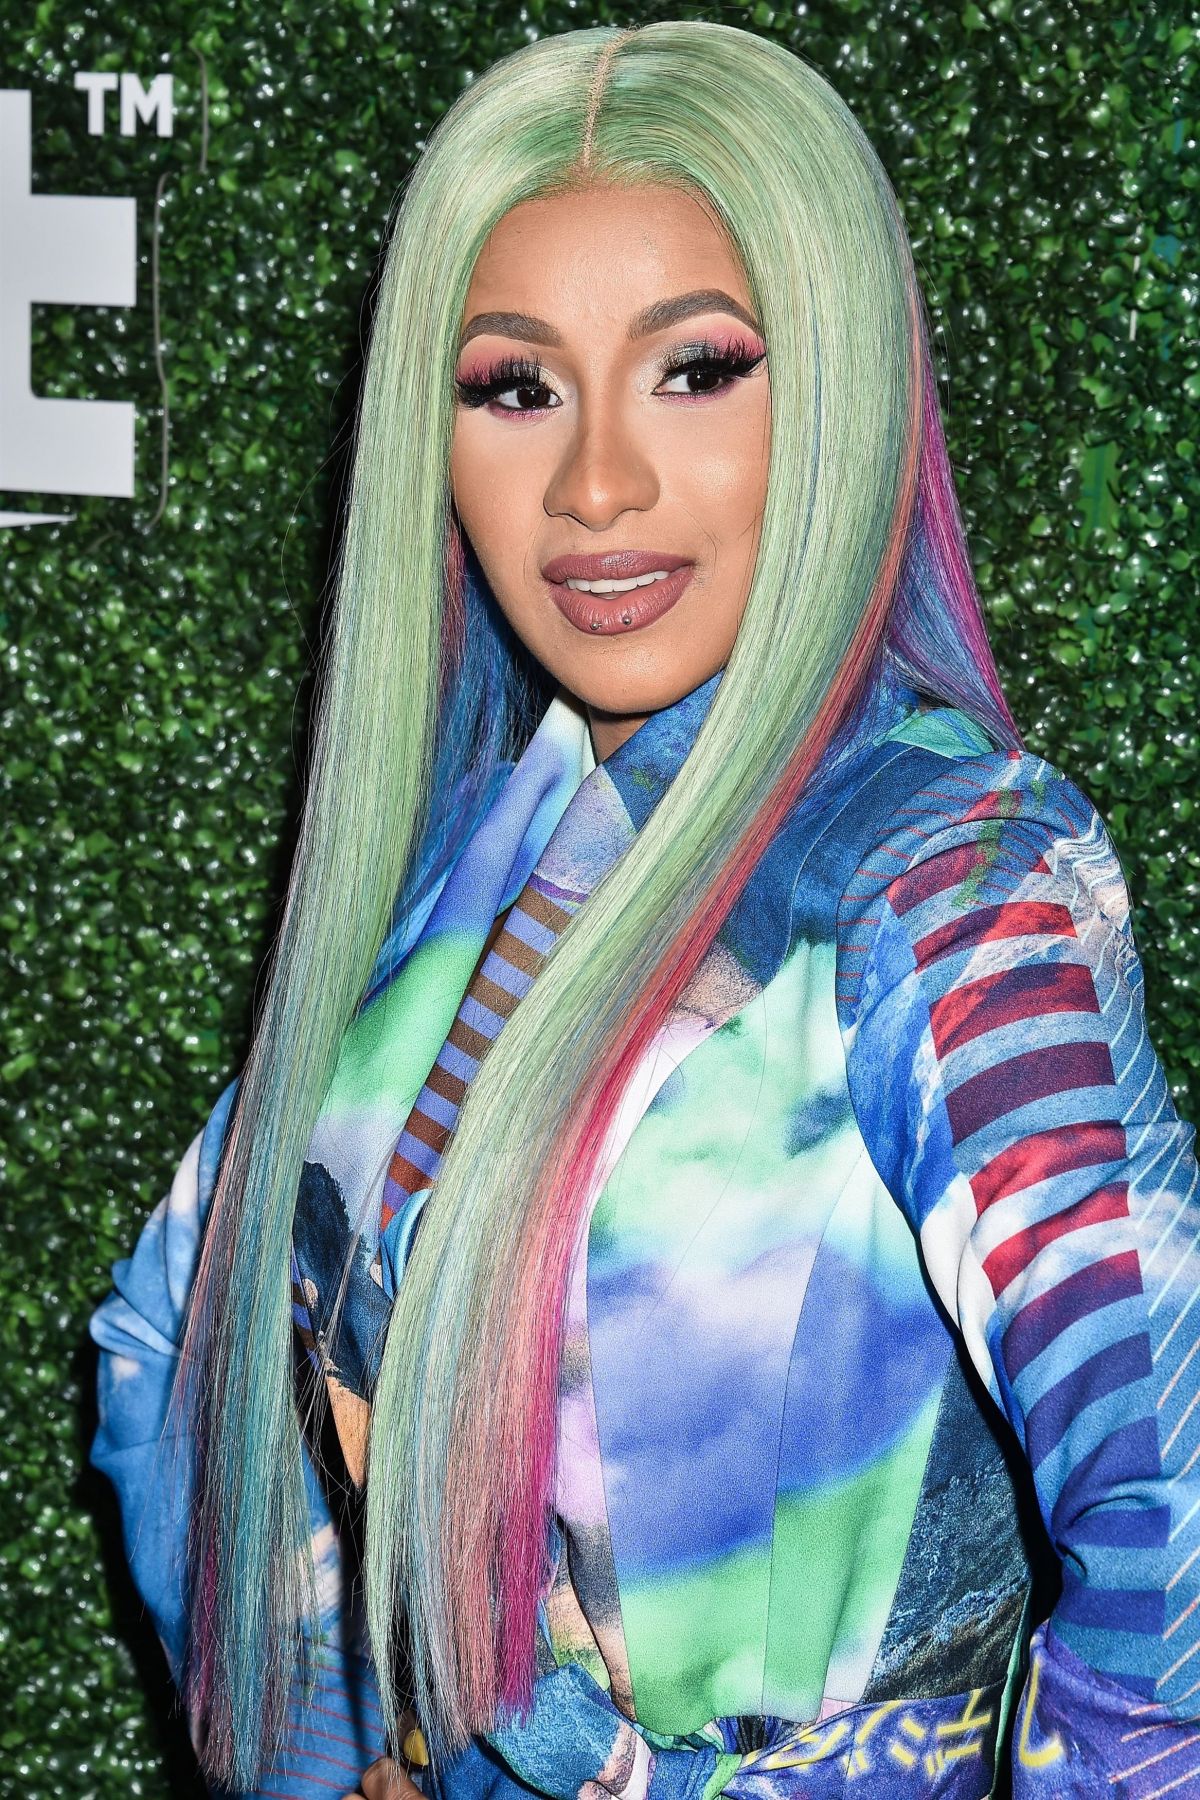 cardi-b-at-swisher-sweets-awards-in-west-hollywood-04-12-2019-3.jpg